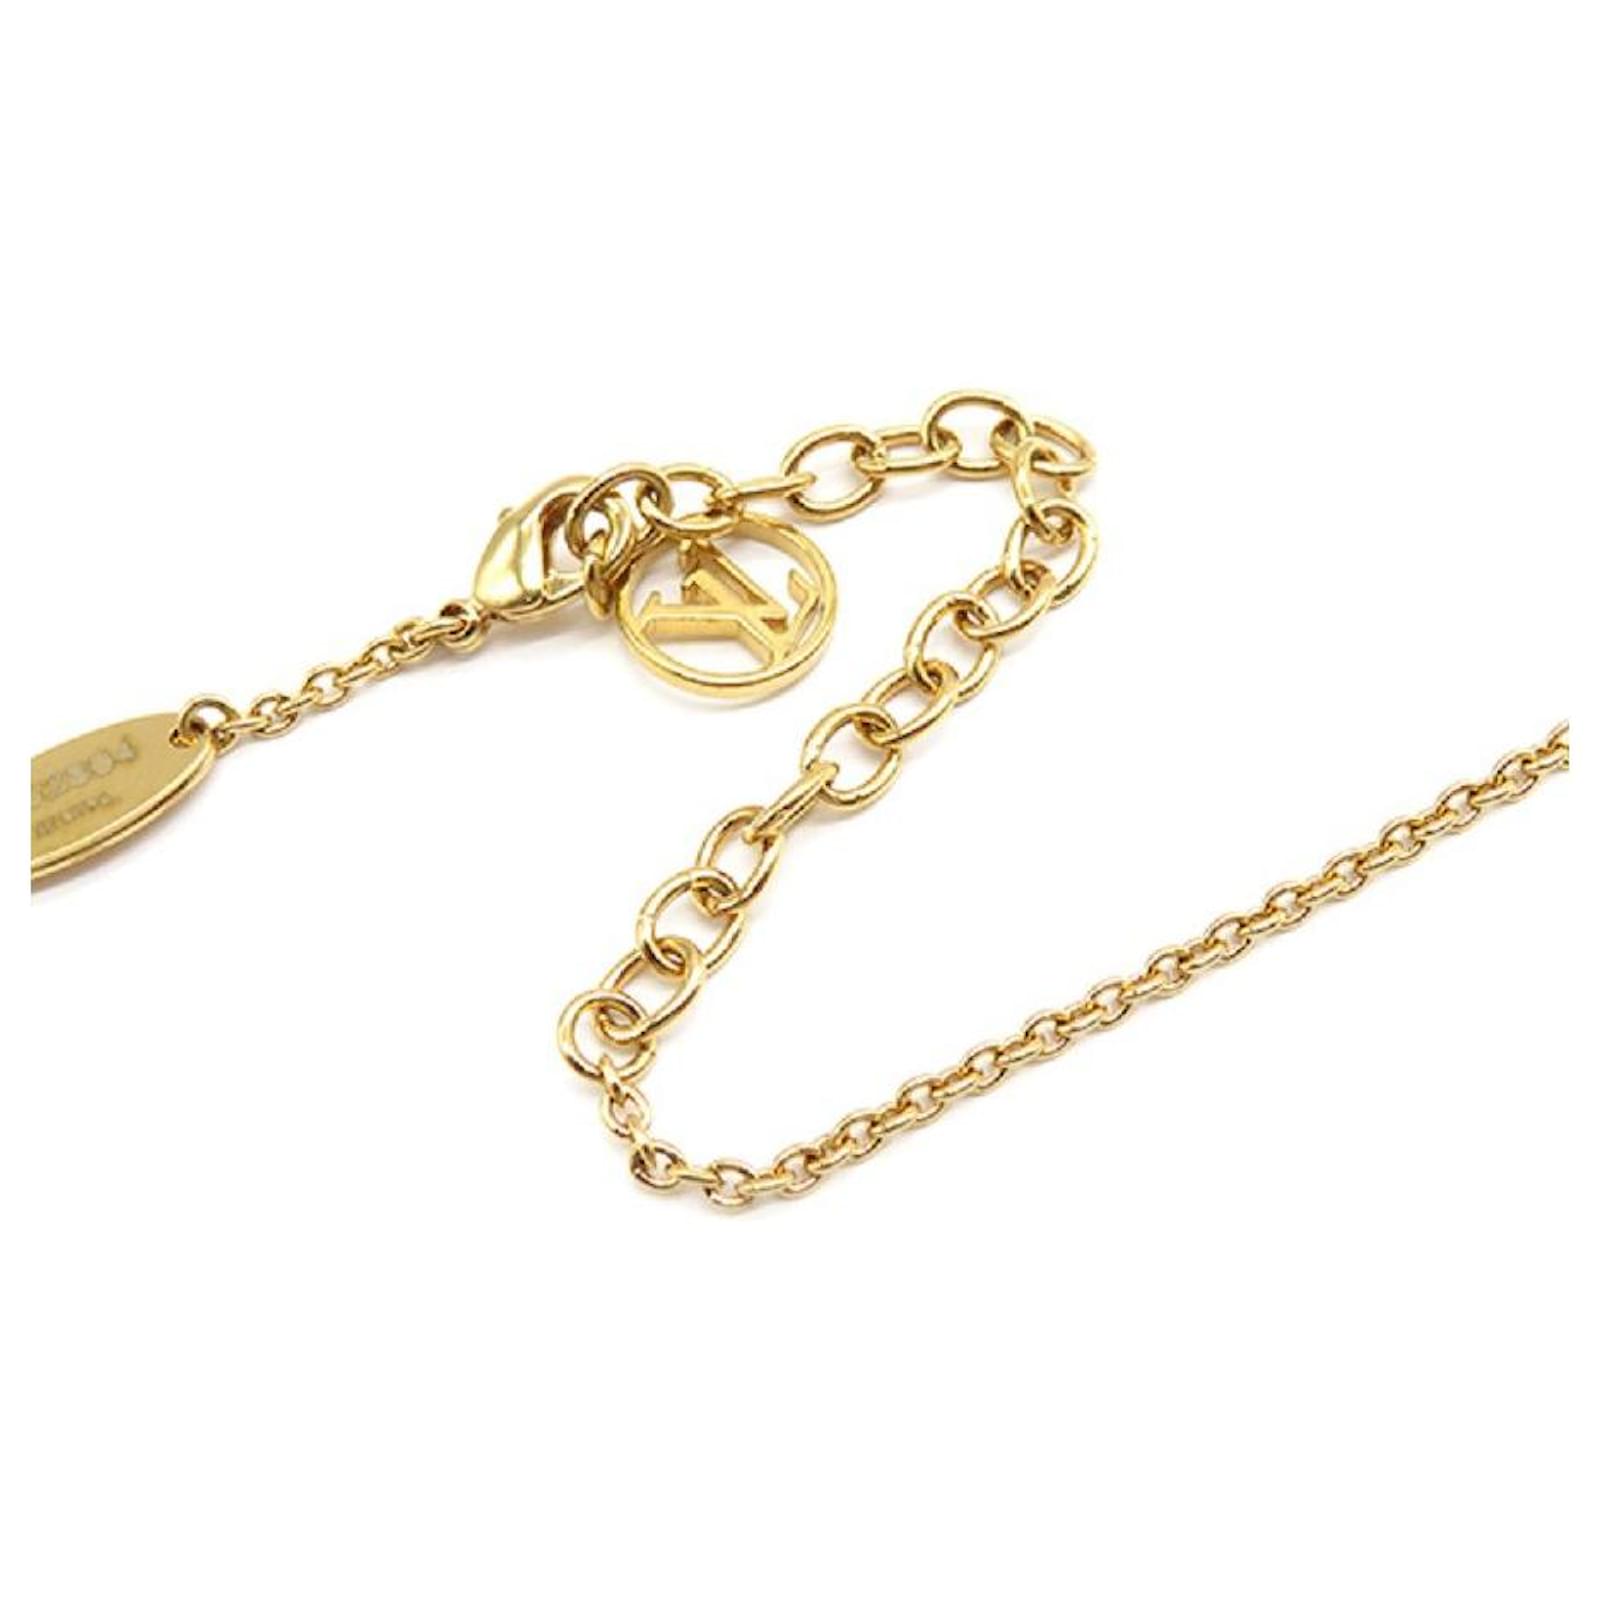 Louis Vuitton, Jewelry, Louis Vuitton Goldtone Charm With Rhinestones  Chain Included